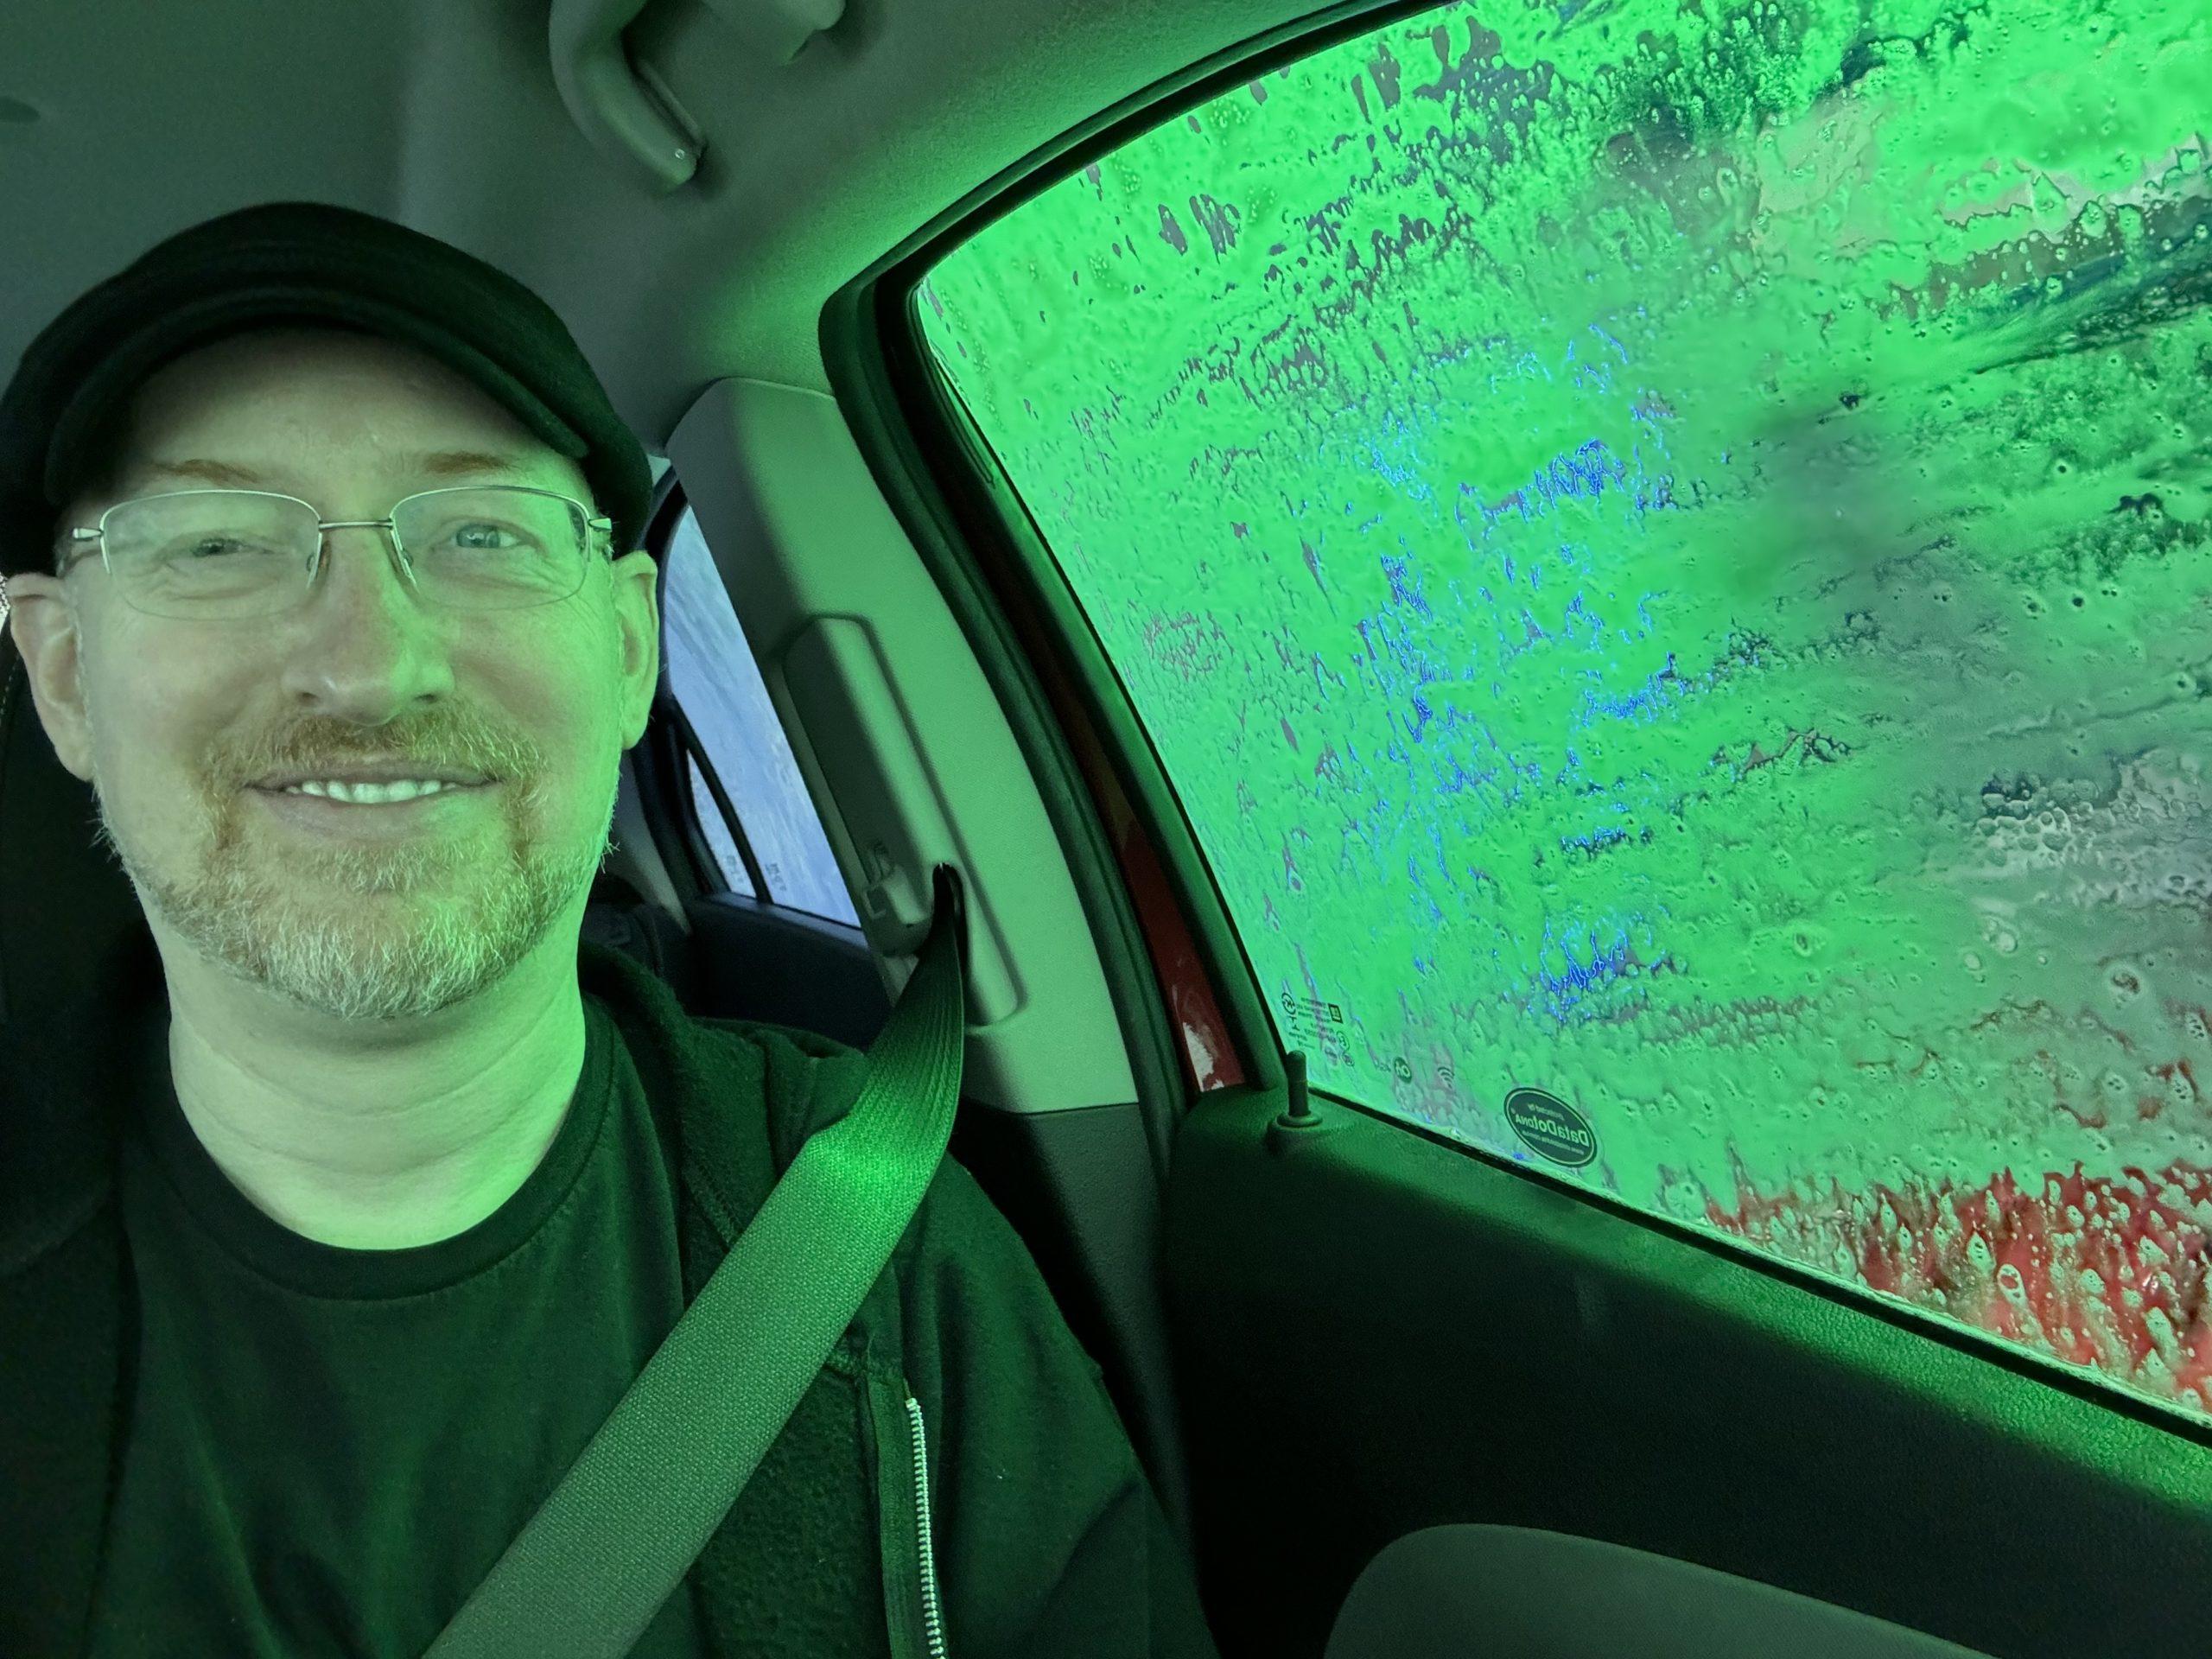 Me in the car, with soap covering the side window, and everything bathed in green light.